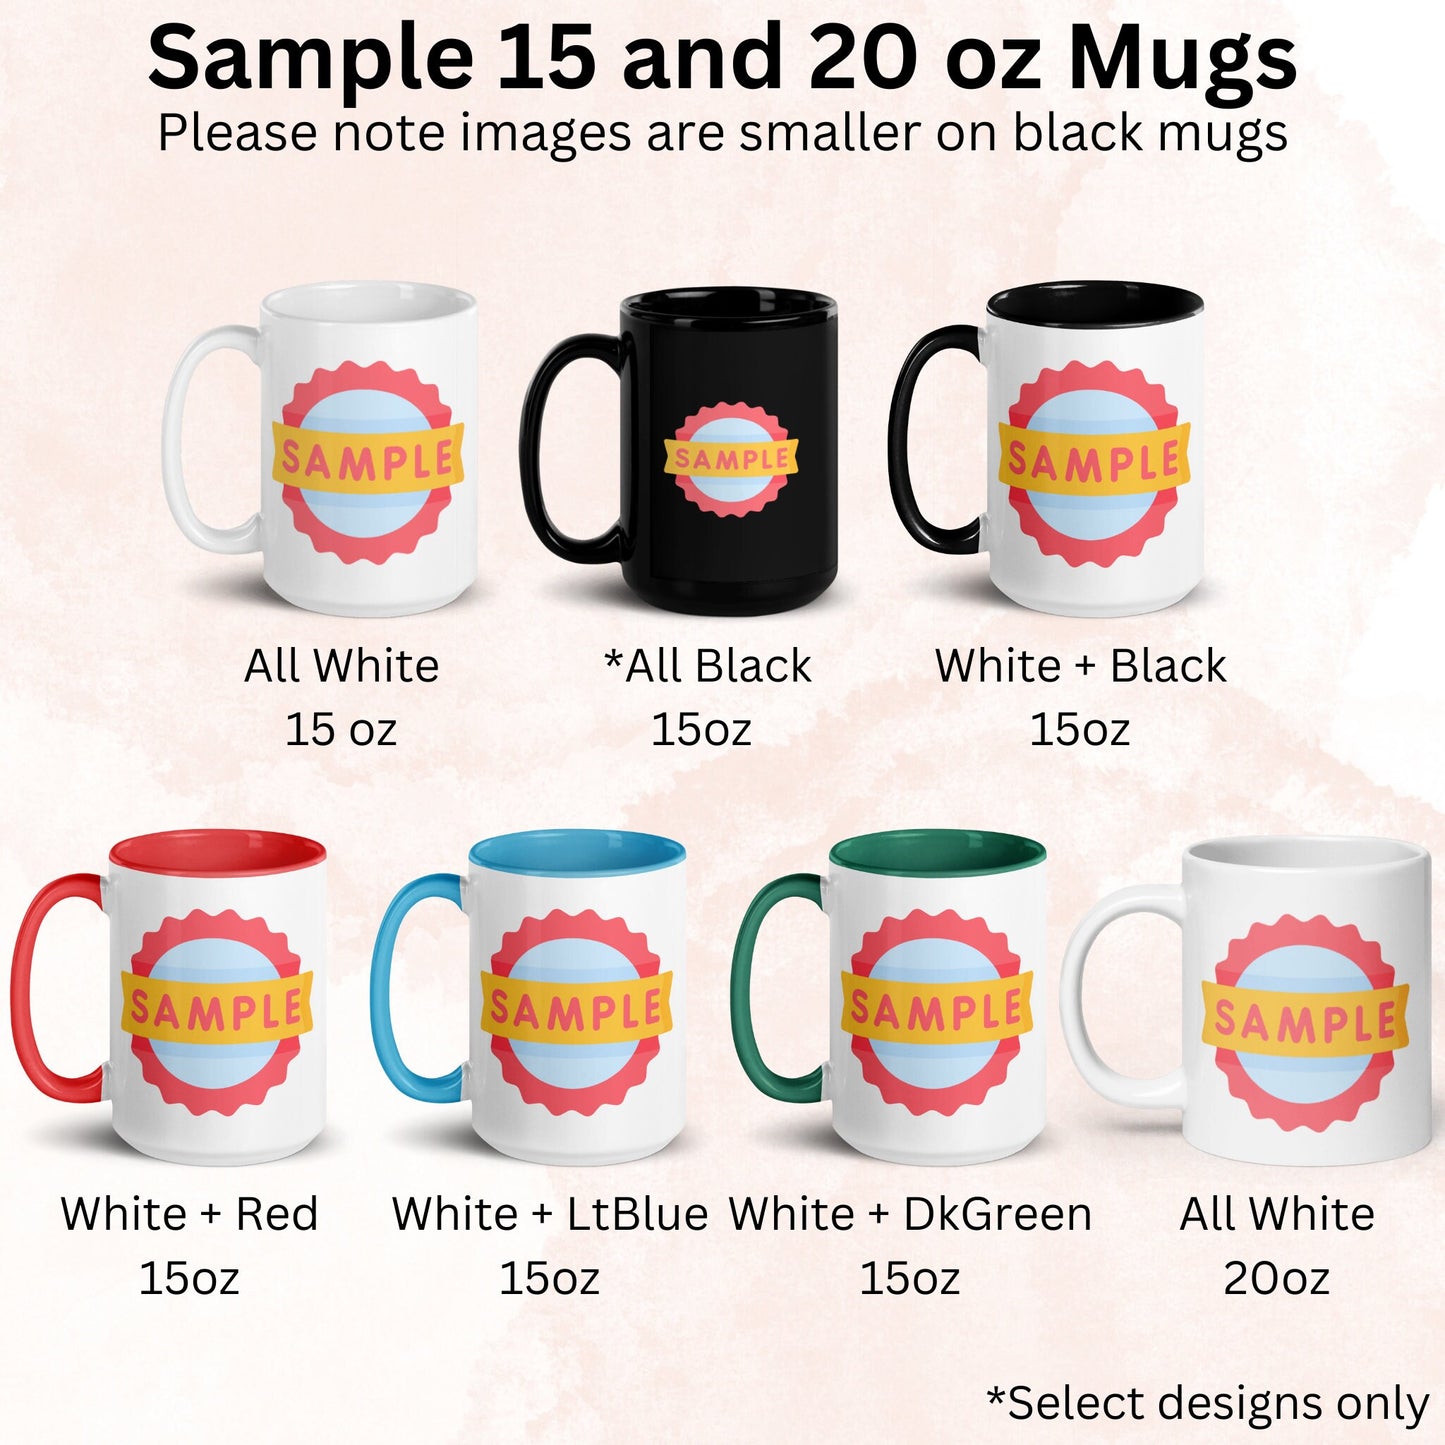 Look At You Becoming A "Create Your Own" and Shit Custom Personalized Mug, Occupation Mug - Zehnaria - OFFICE & WORK - Mugs